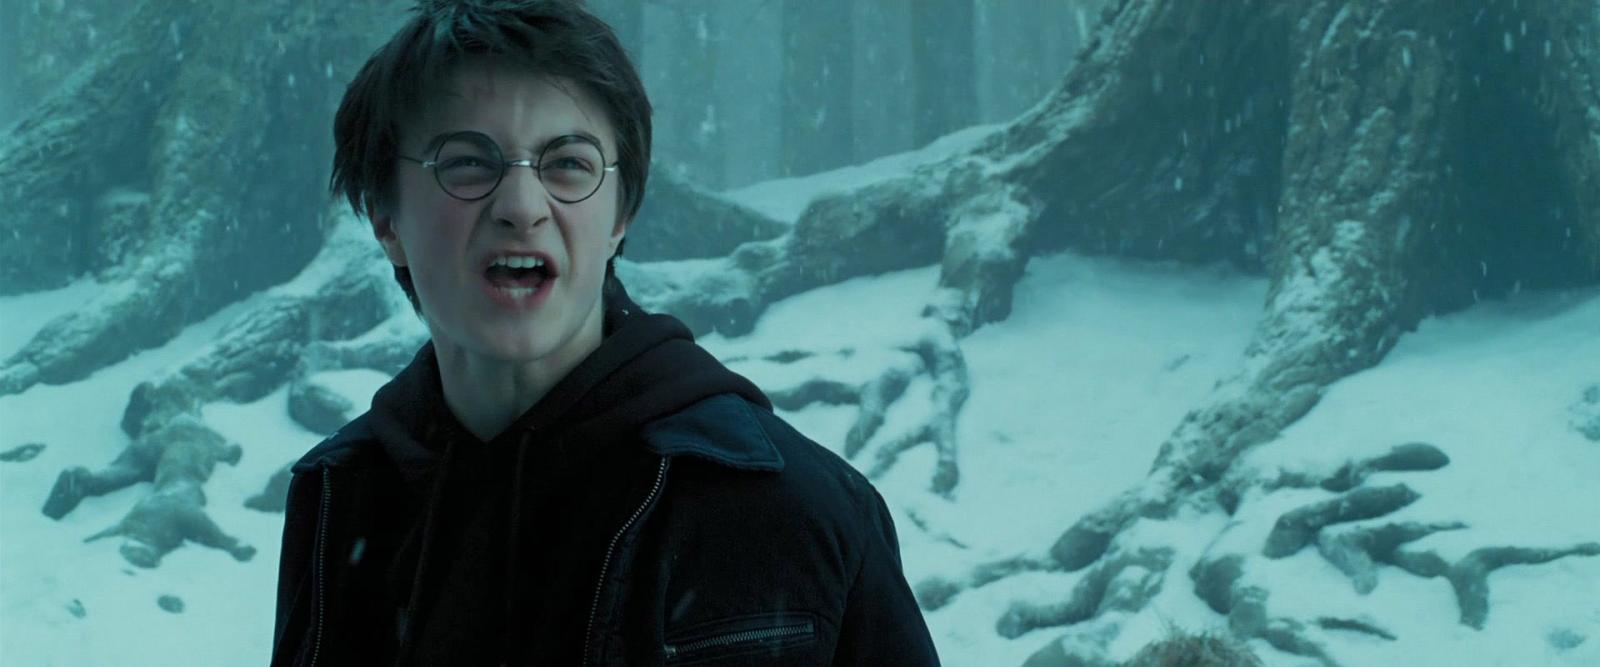 The 8 Most Overrated Moments in the Harry Potter Series - image 1